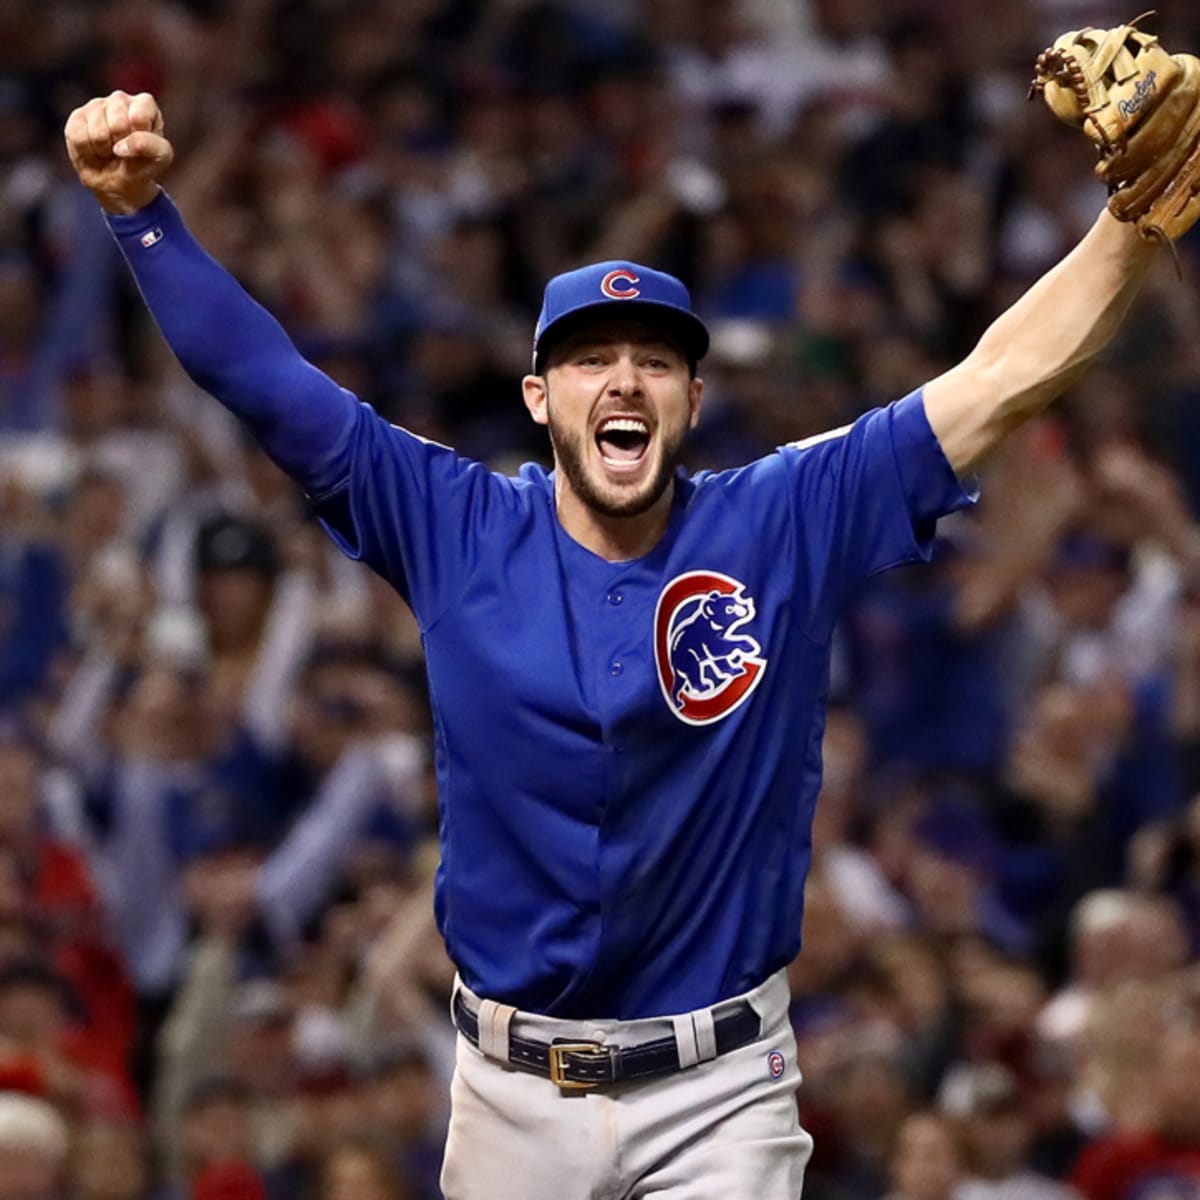 Kris Bryant smiled before final out to end Cubs drought - Sports